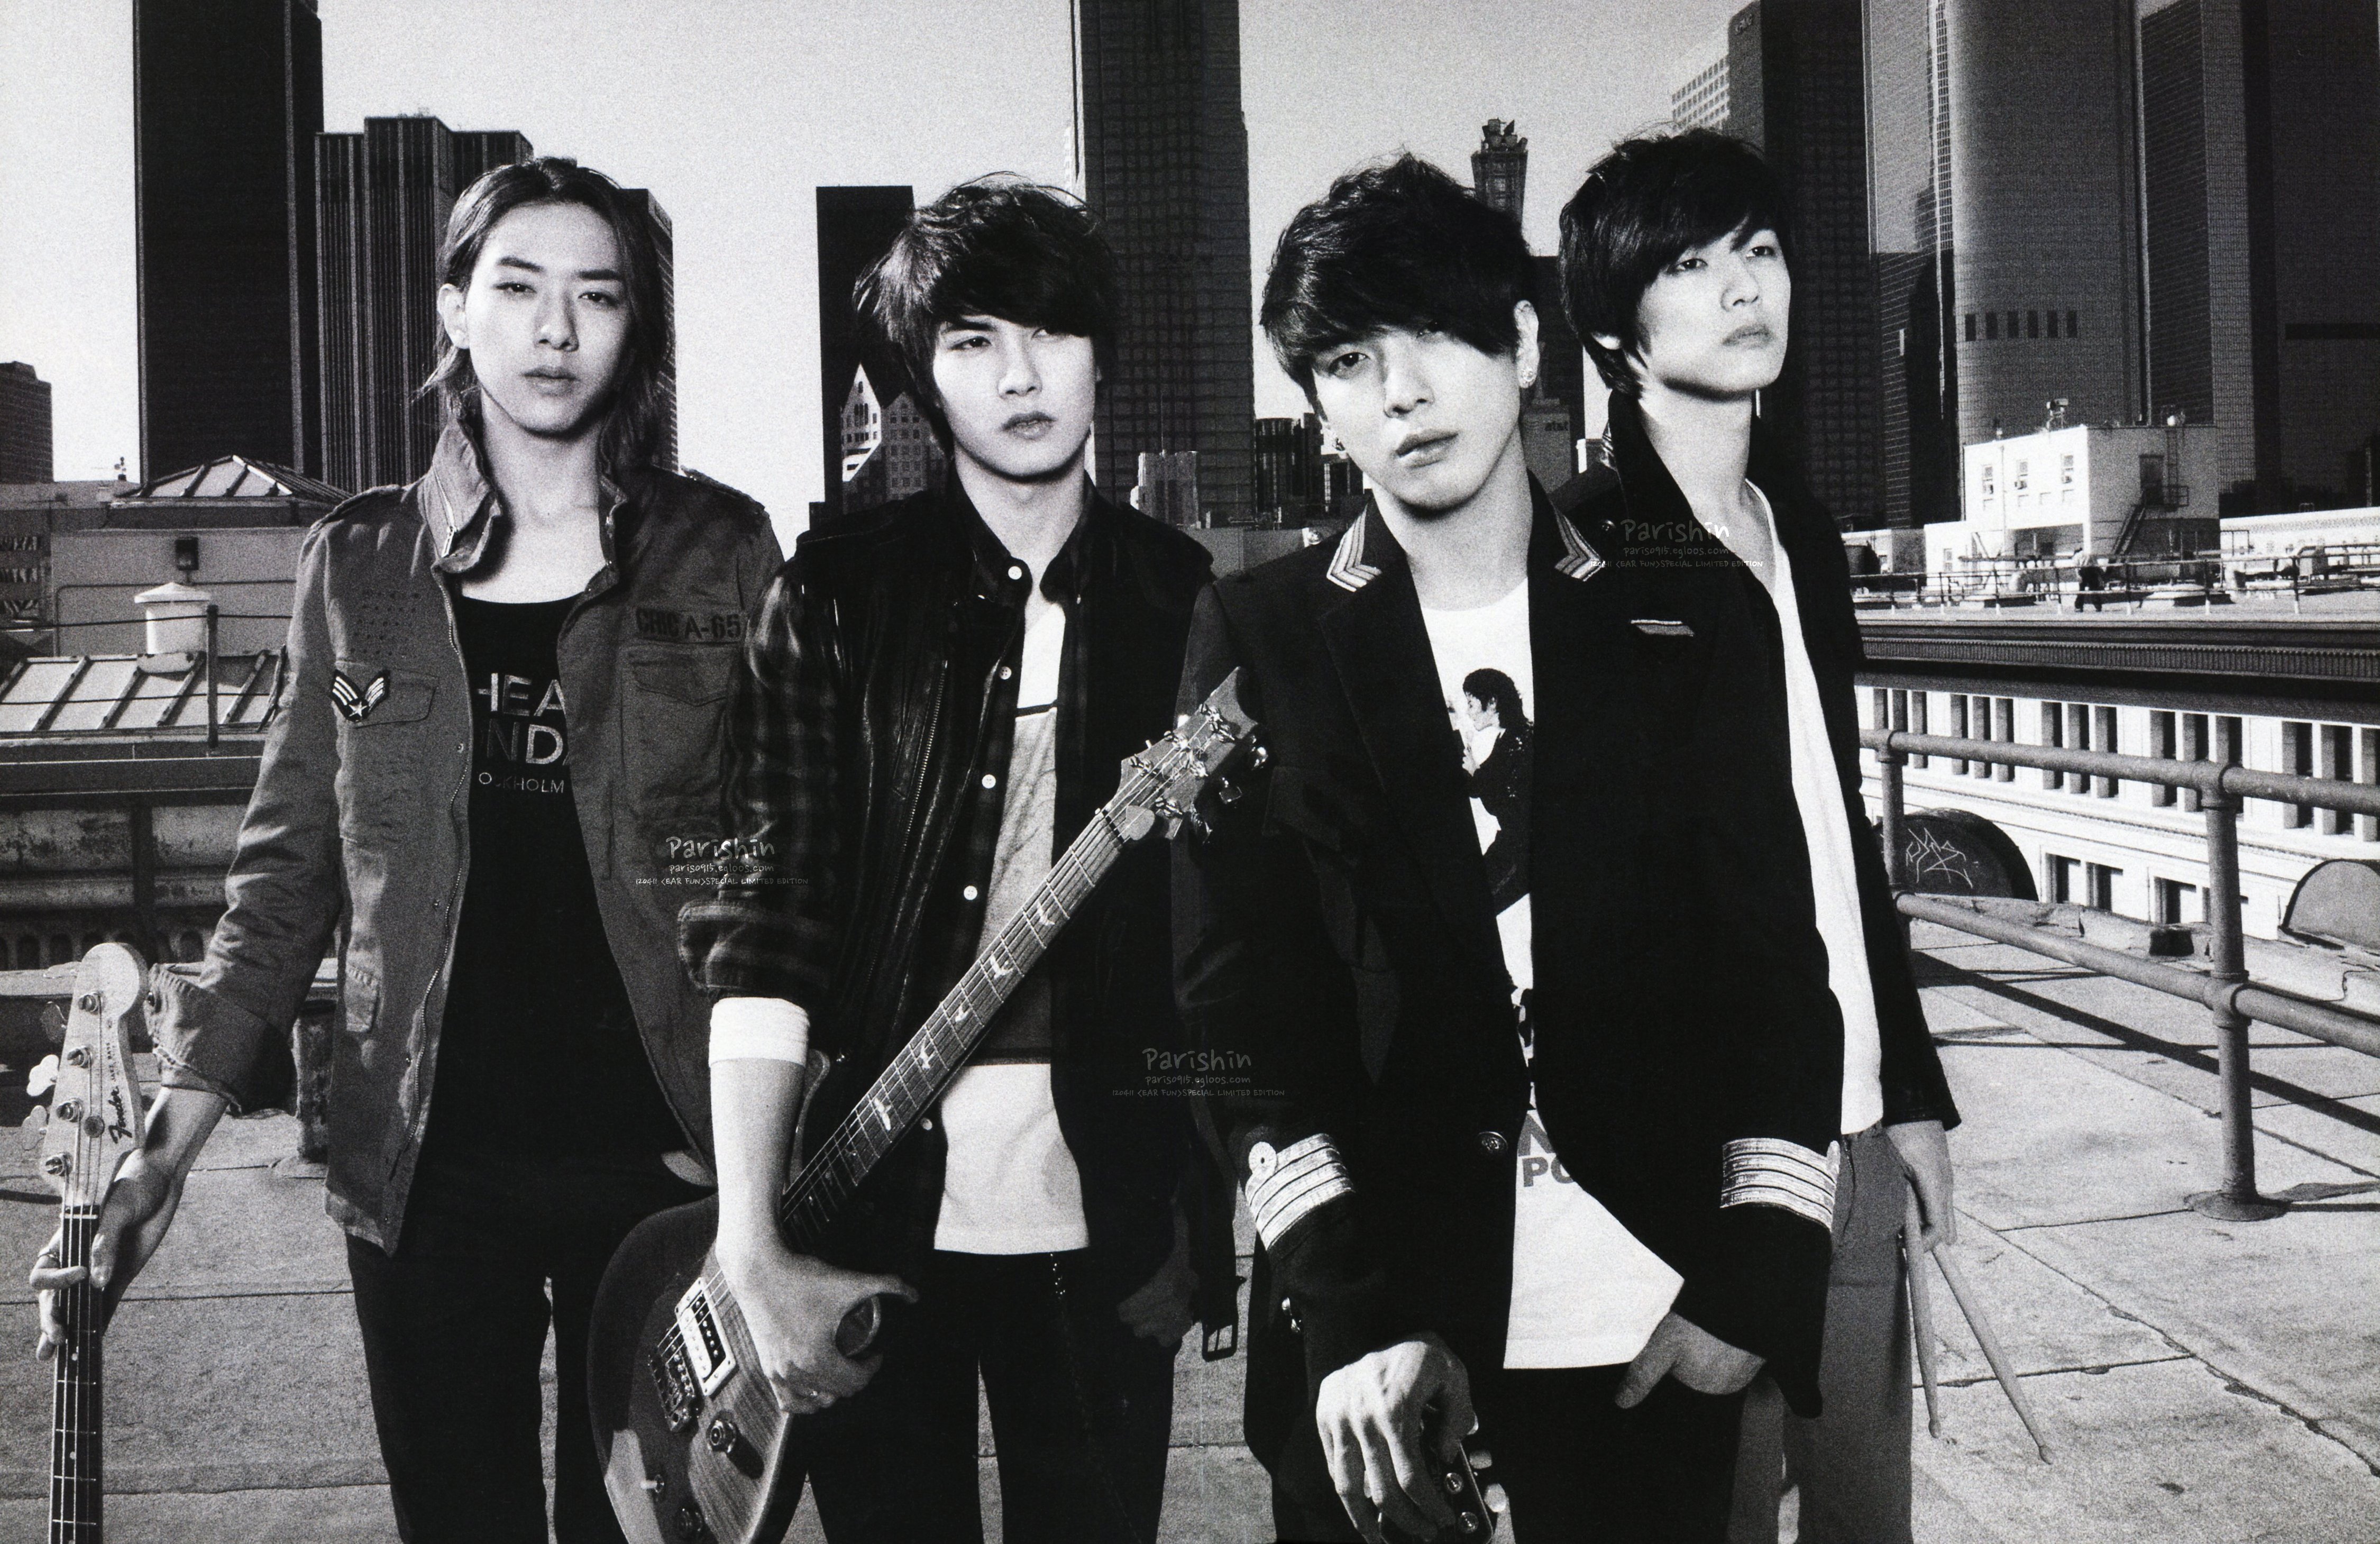 Cnblue Wallpapers Group 75